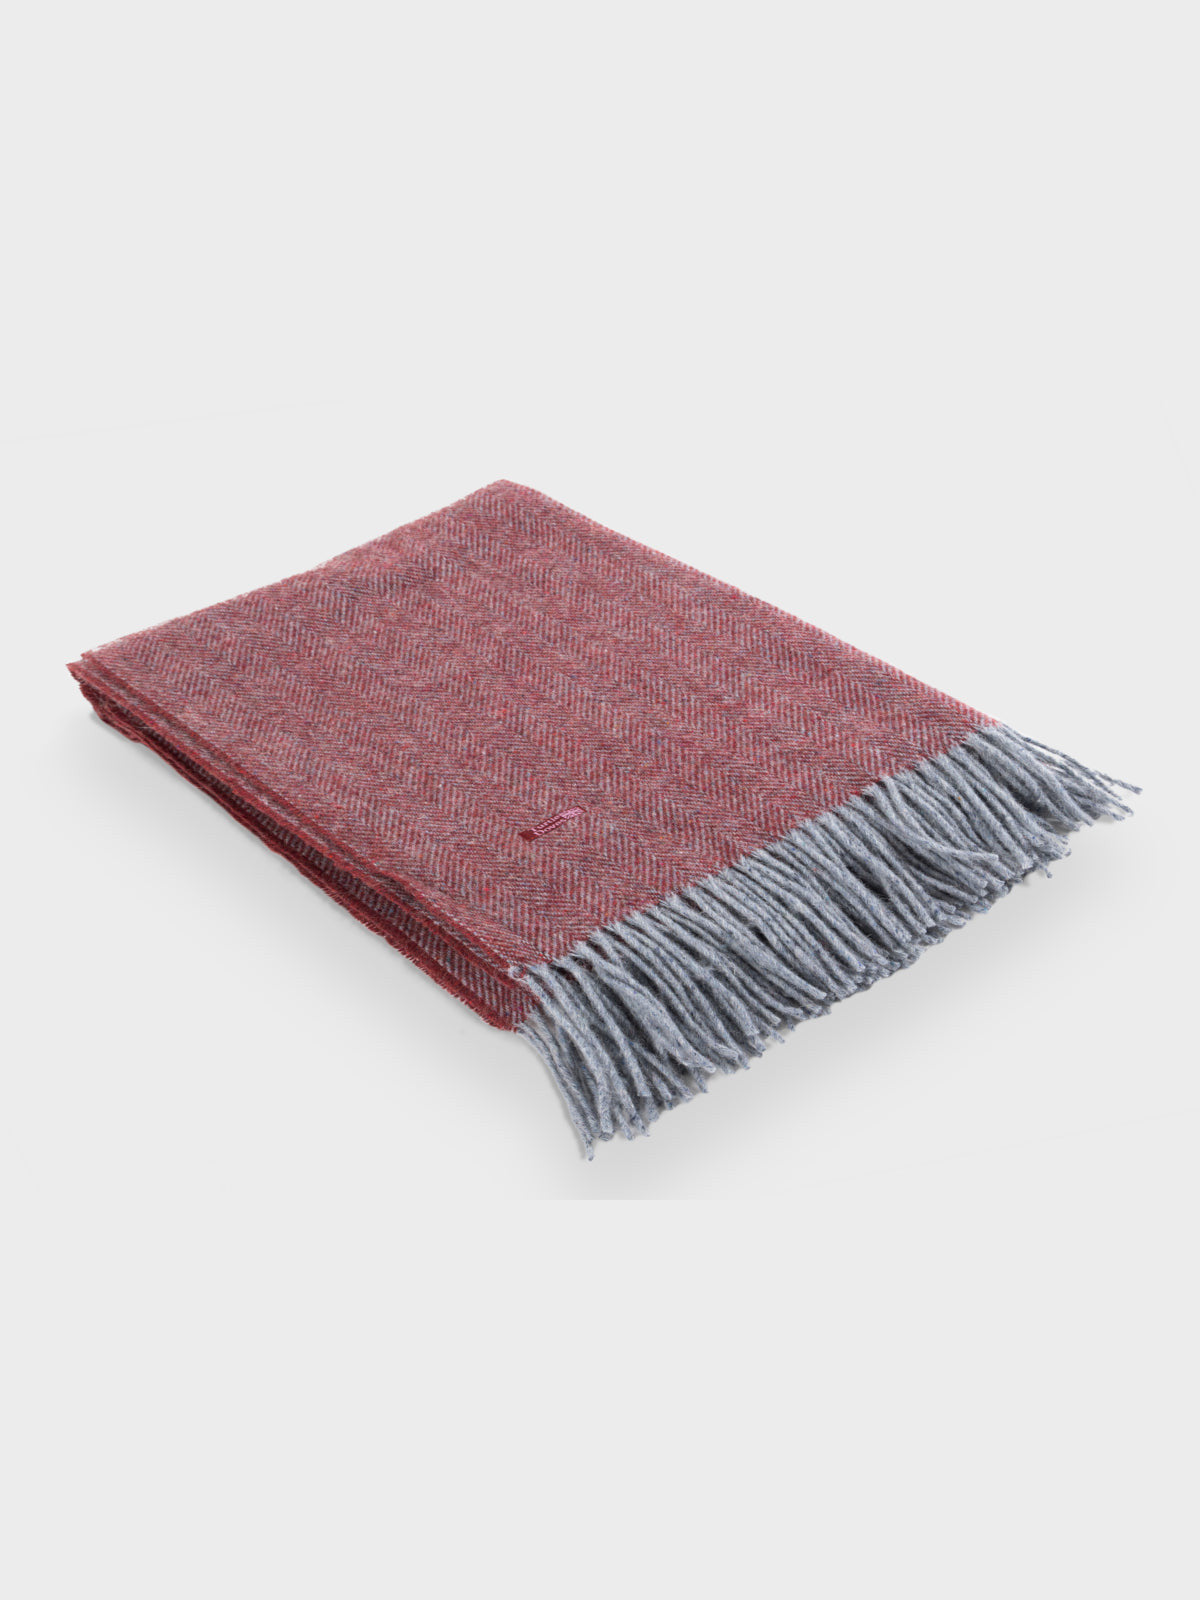 Folded Brick Red Cashmere and Merino Recycled Wool Blanket Turtle Doves at The British Blanket Company